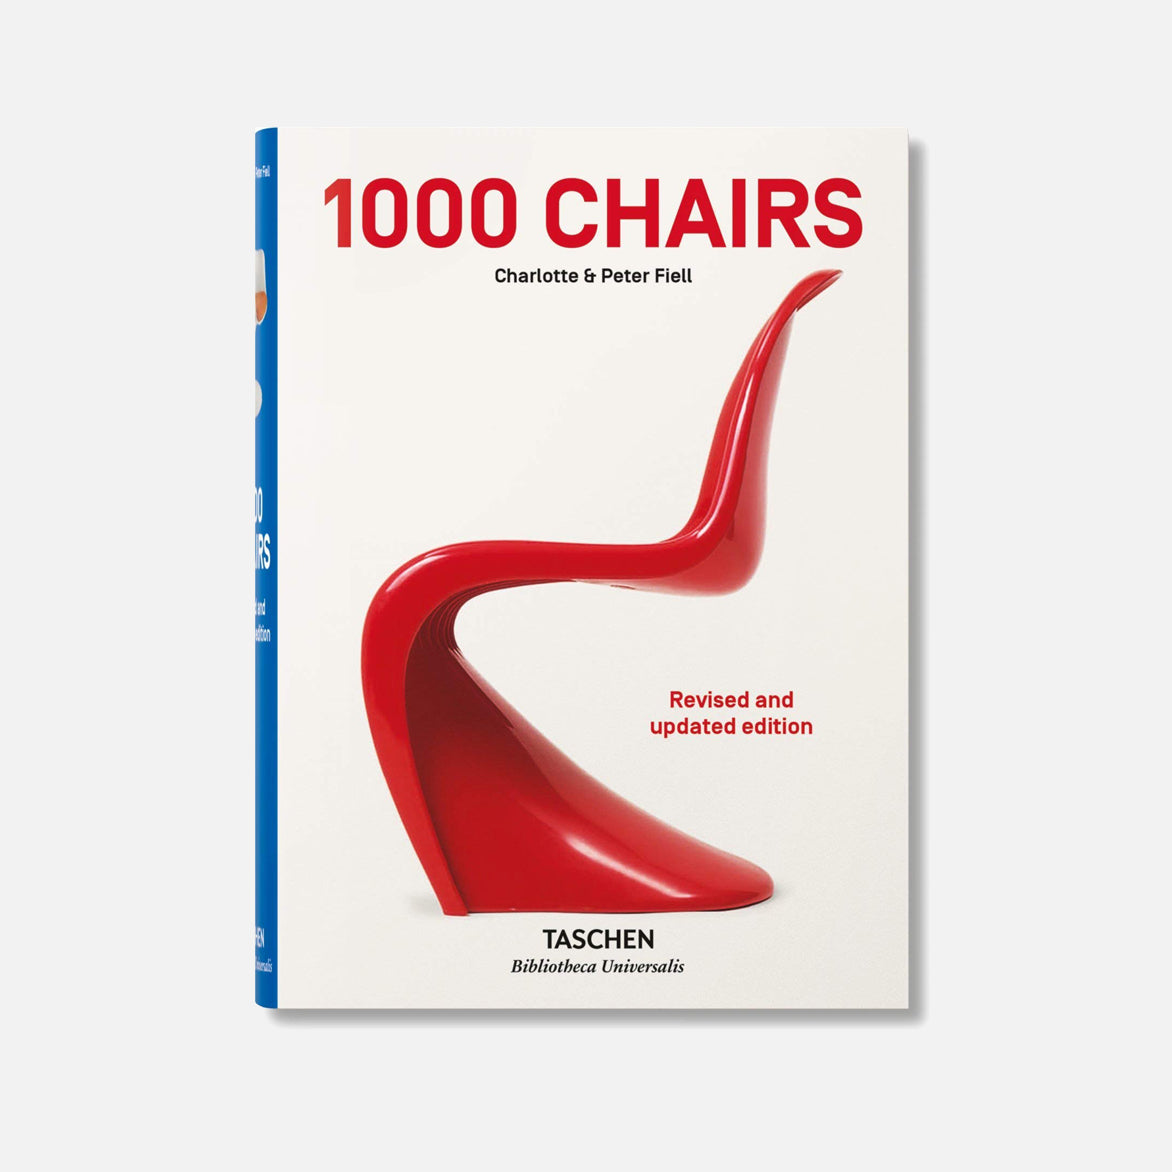 1000 CHAIRS